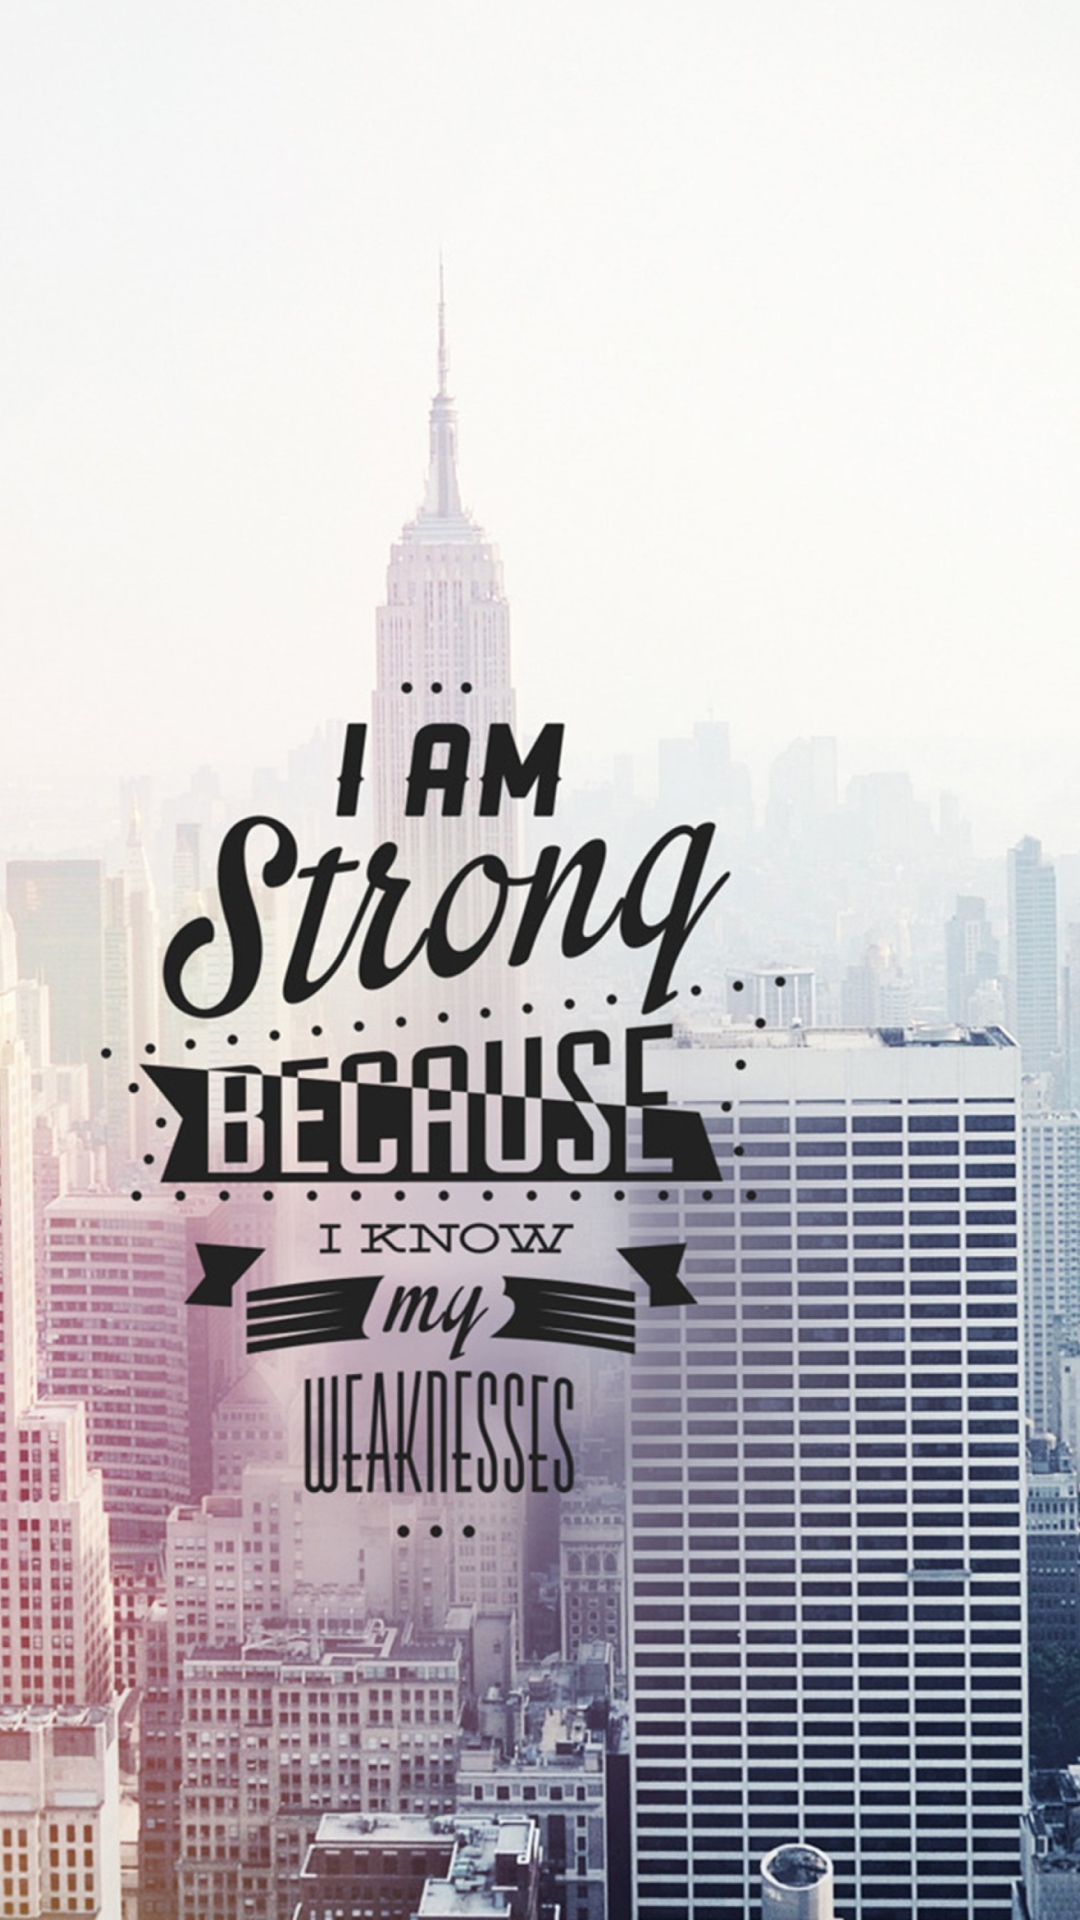 Обои I am strong because i know my weakness 1080x1920